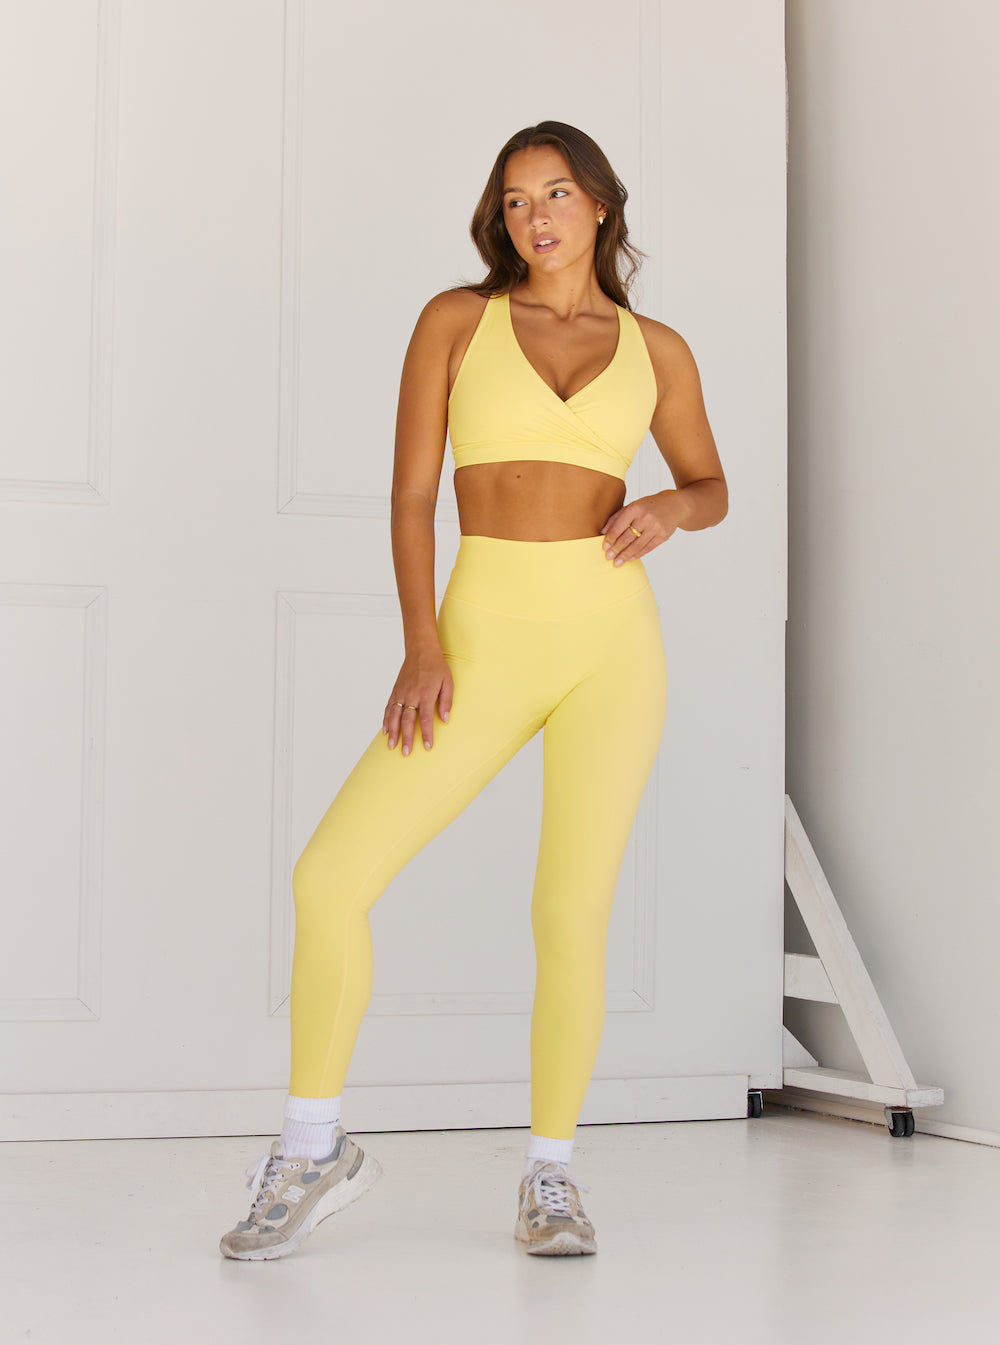 High Waist Balance Collection Yoga Pants For Women Full Leggings For  Running, Sports, And Workouts By Lululemens Lemons From Anapples456, $11.18